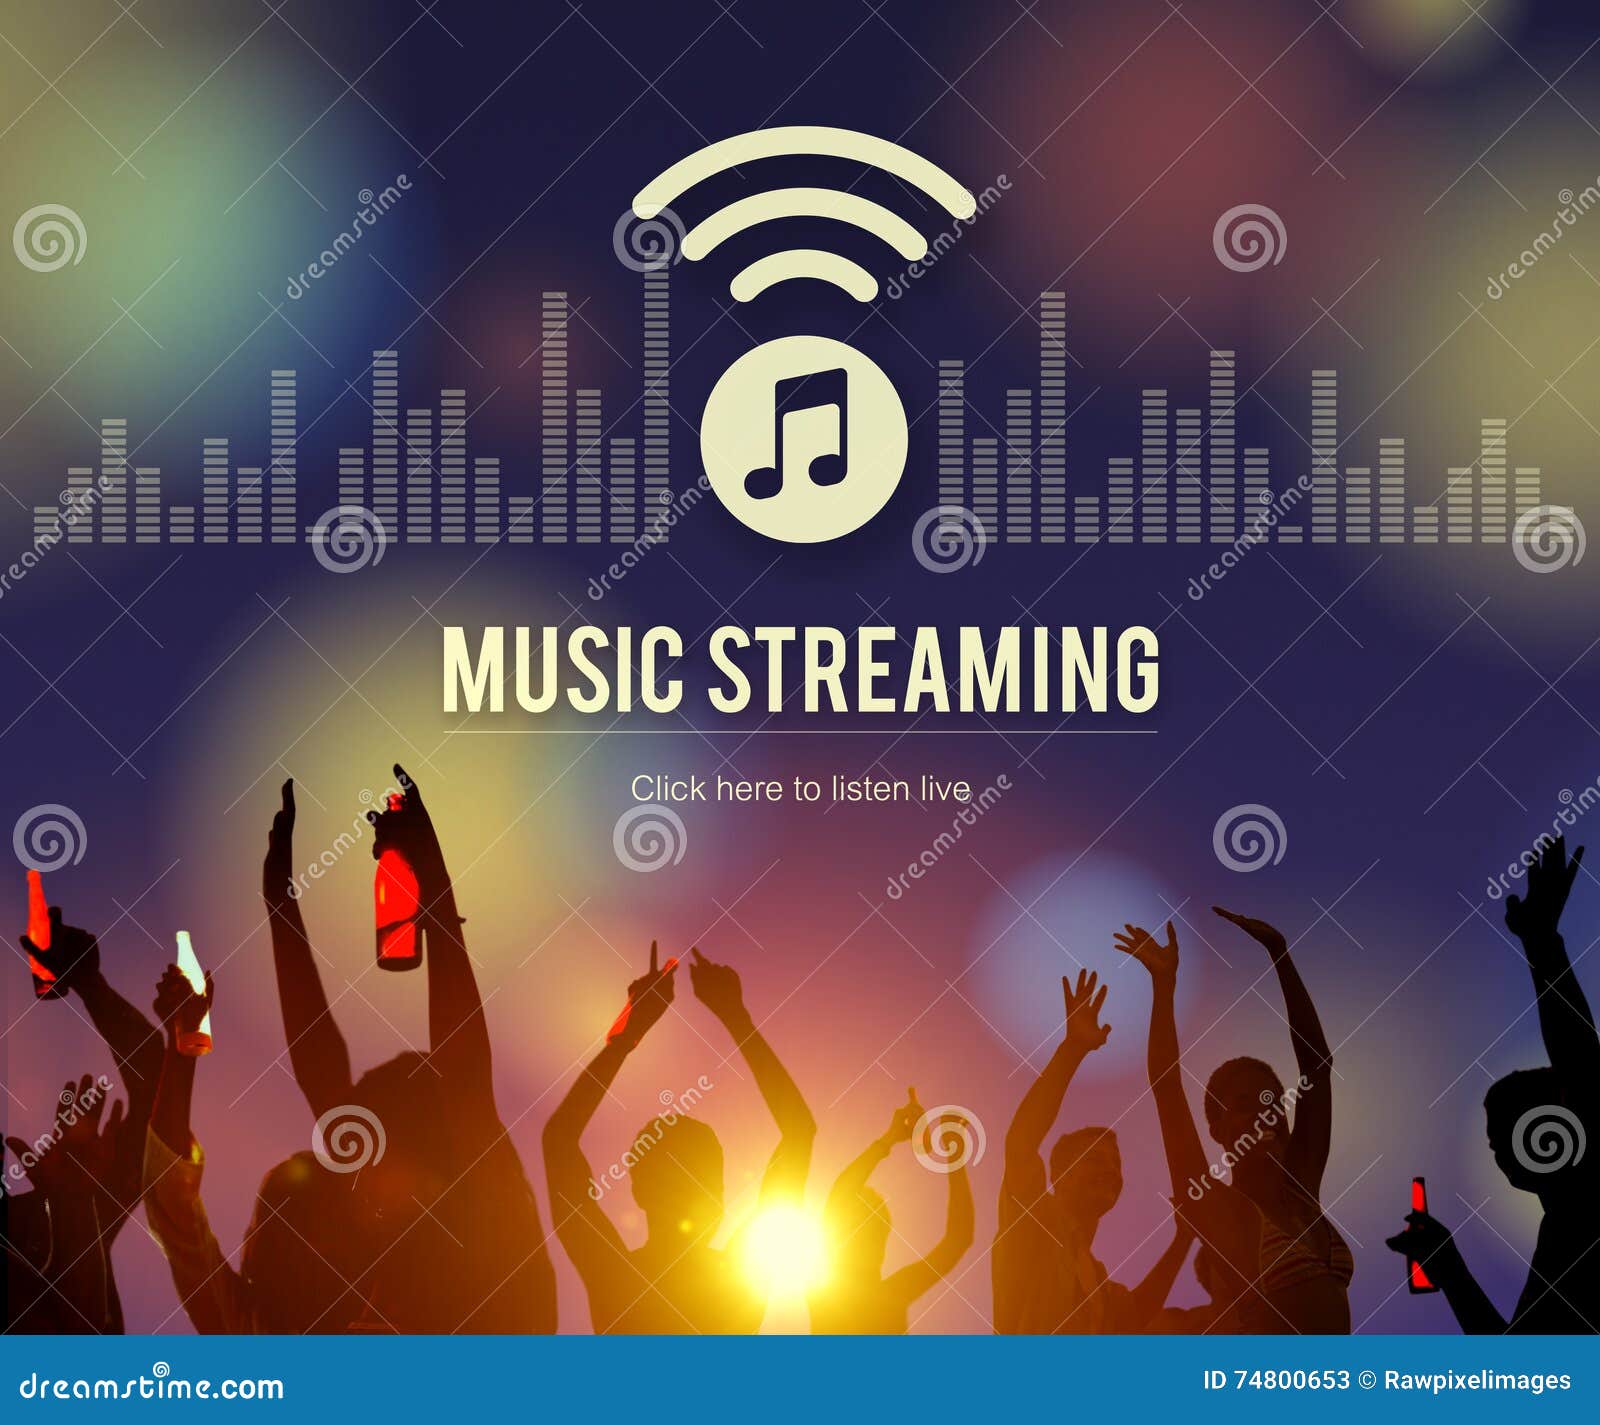 music streaming media entertainment download equalizer concept